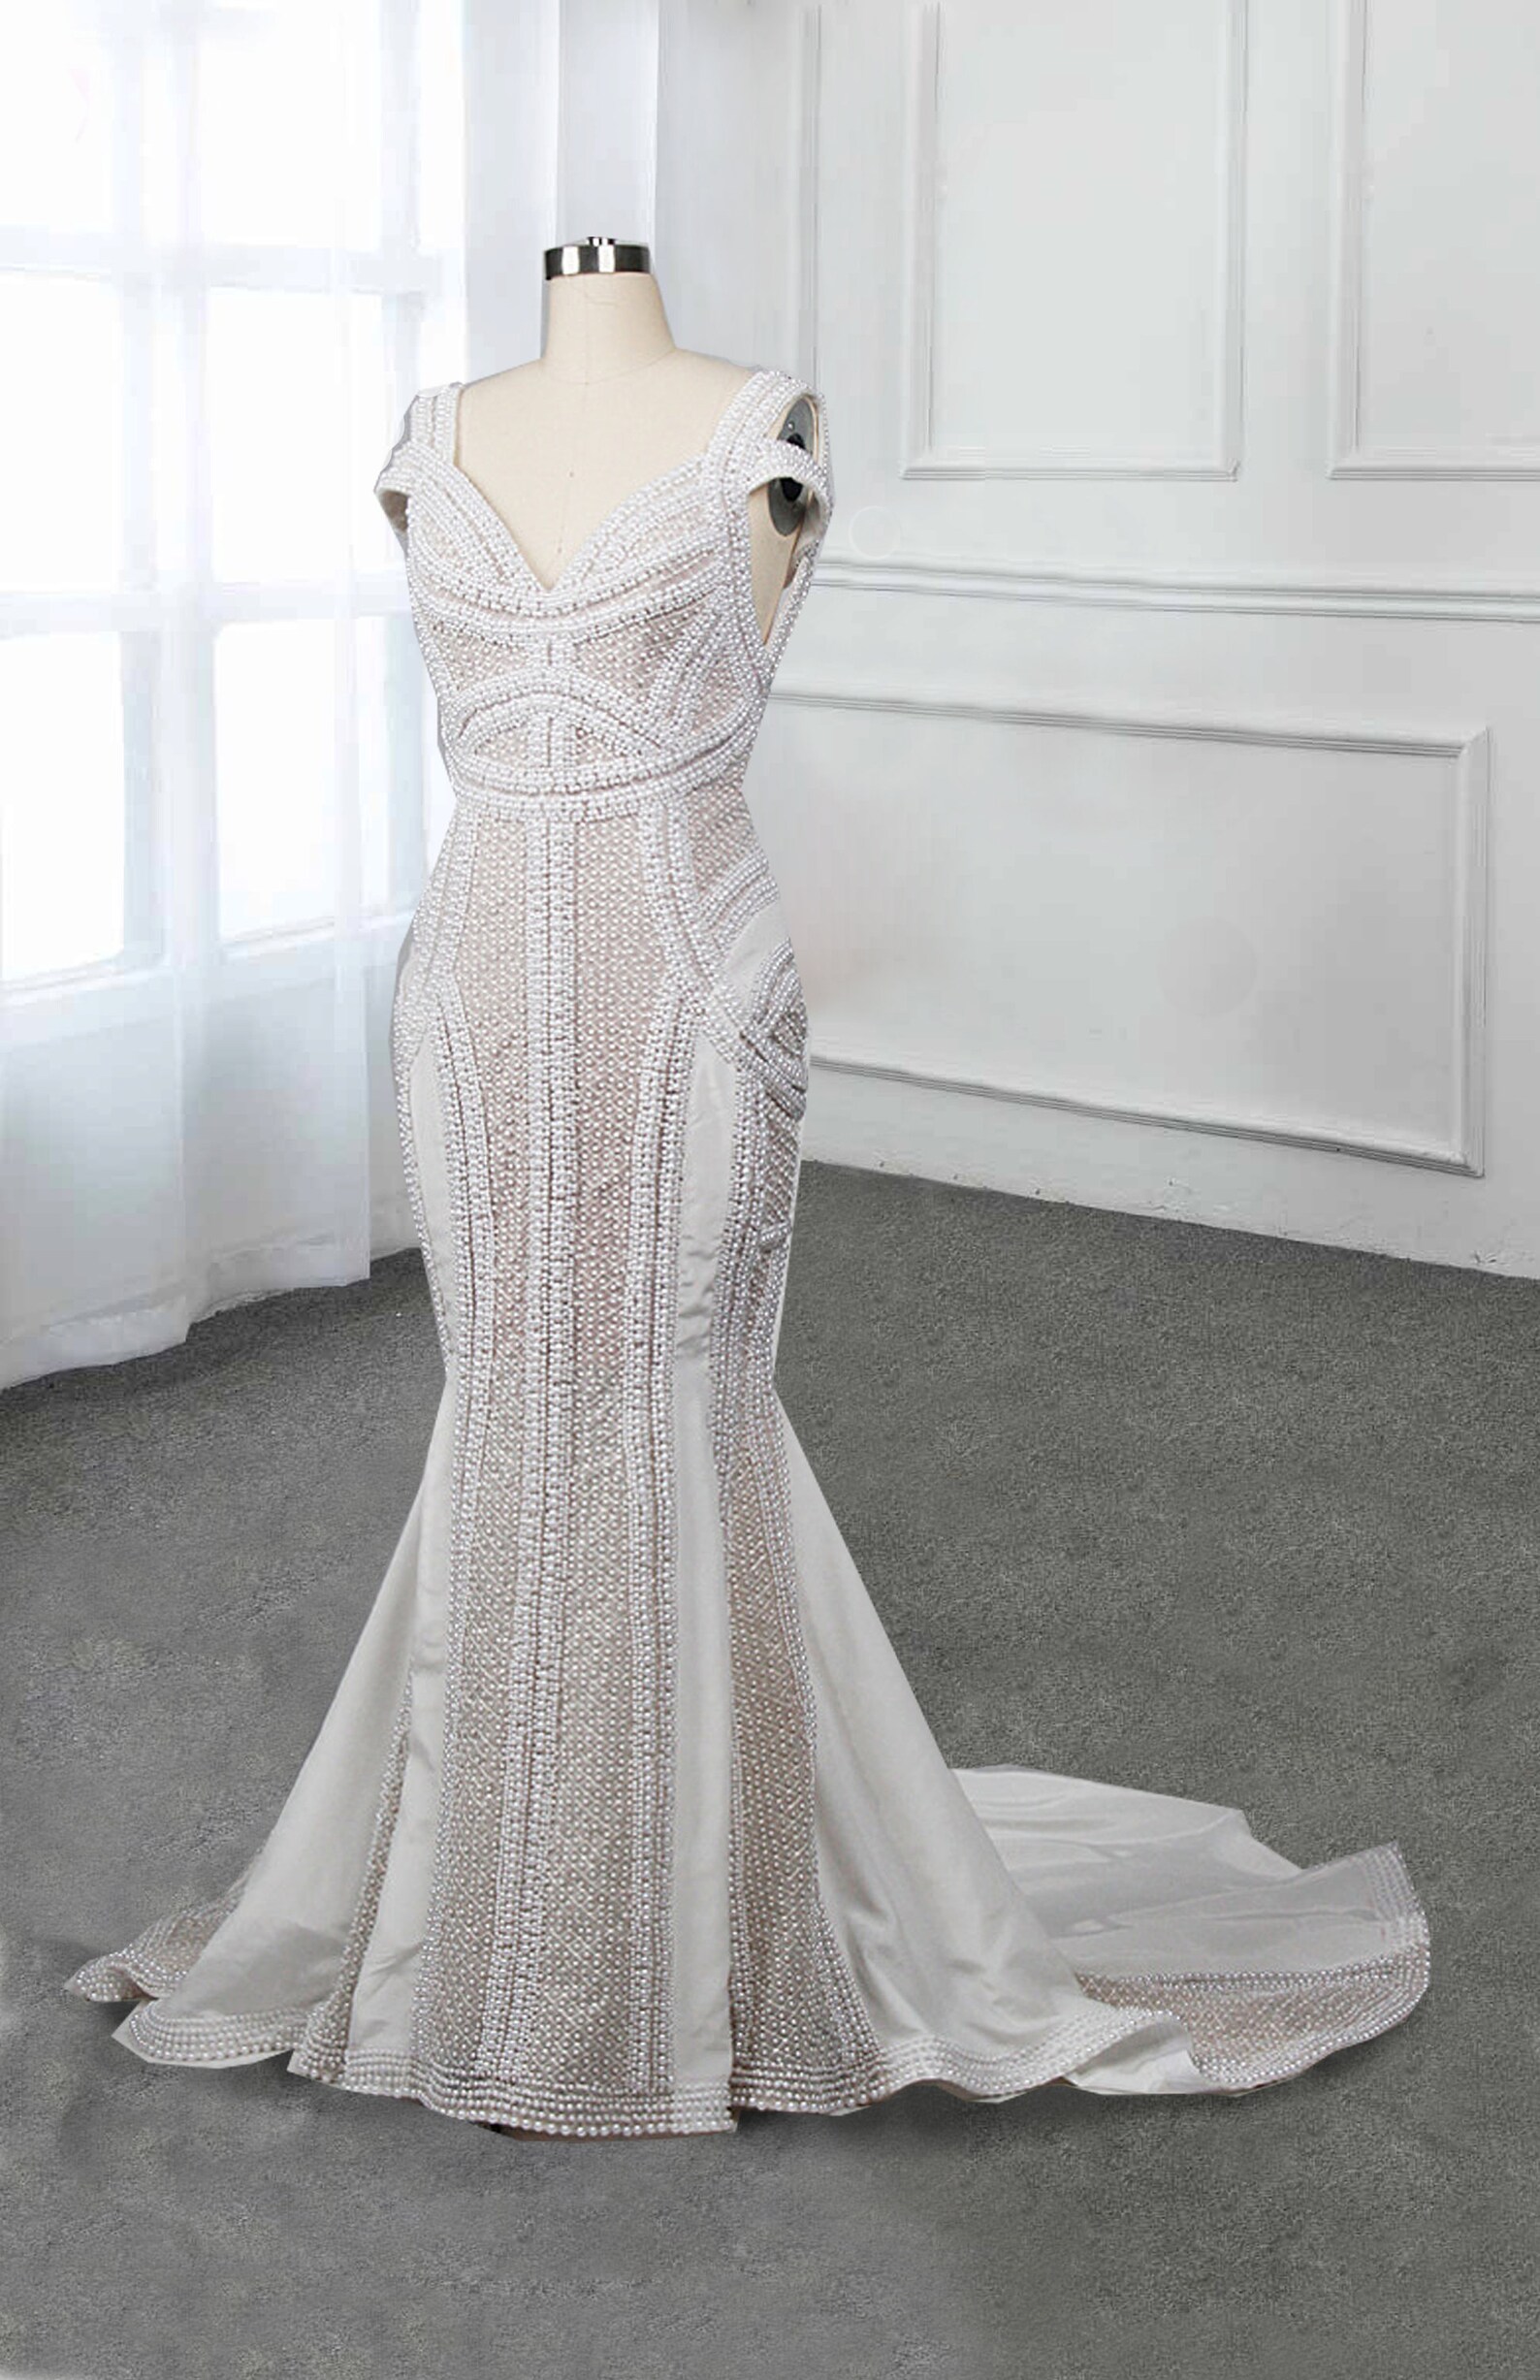 Unique Pearl Bridal Gown With Open Back Mermaid Wedding Dress - Etsy